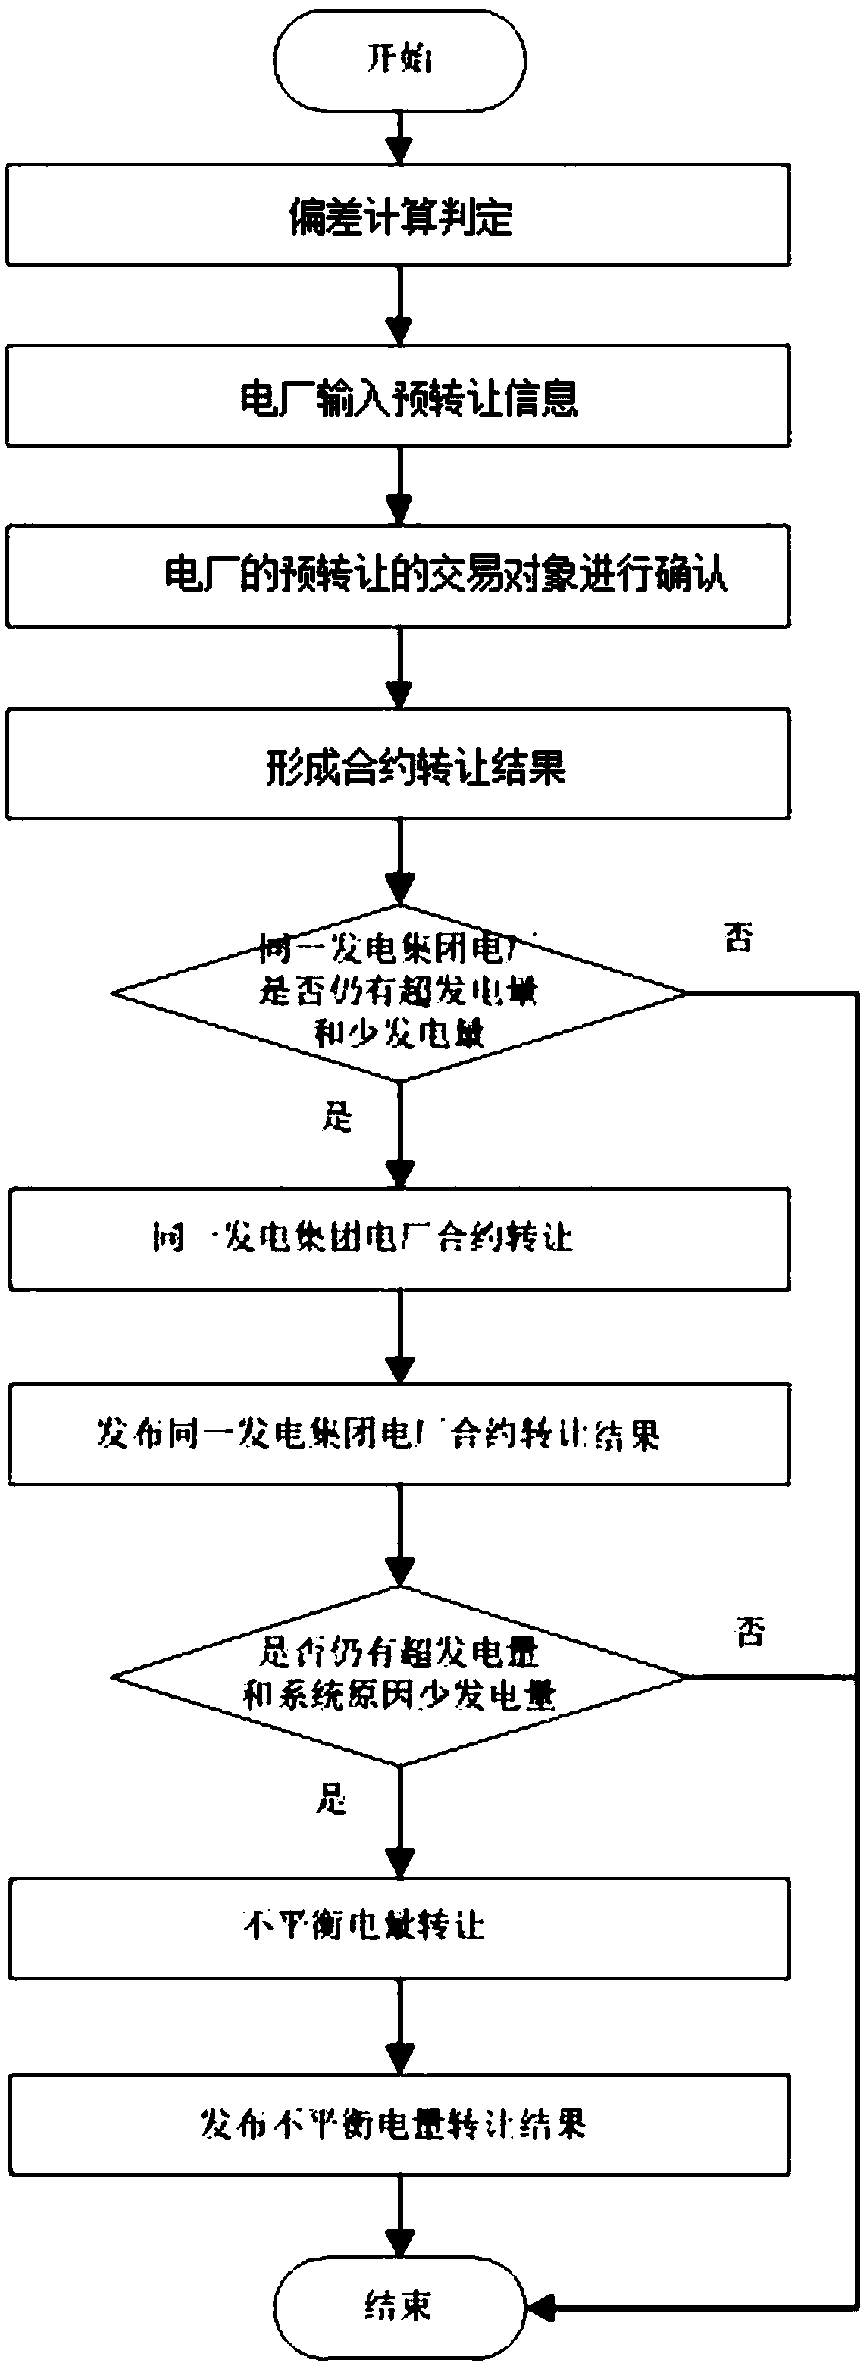 A monthly power generation contract transfer trading system and trading method